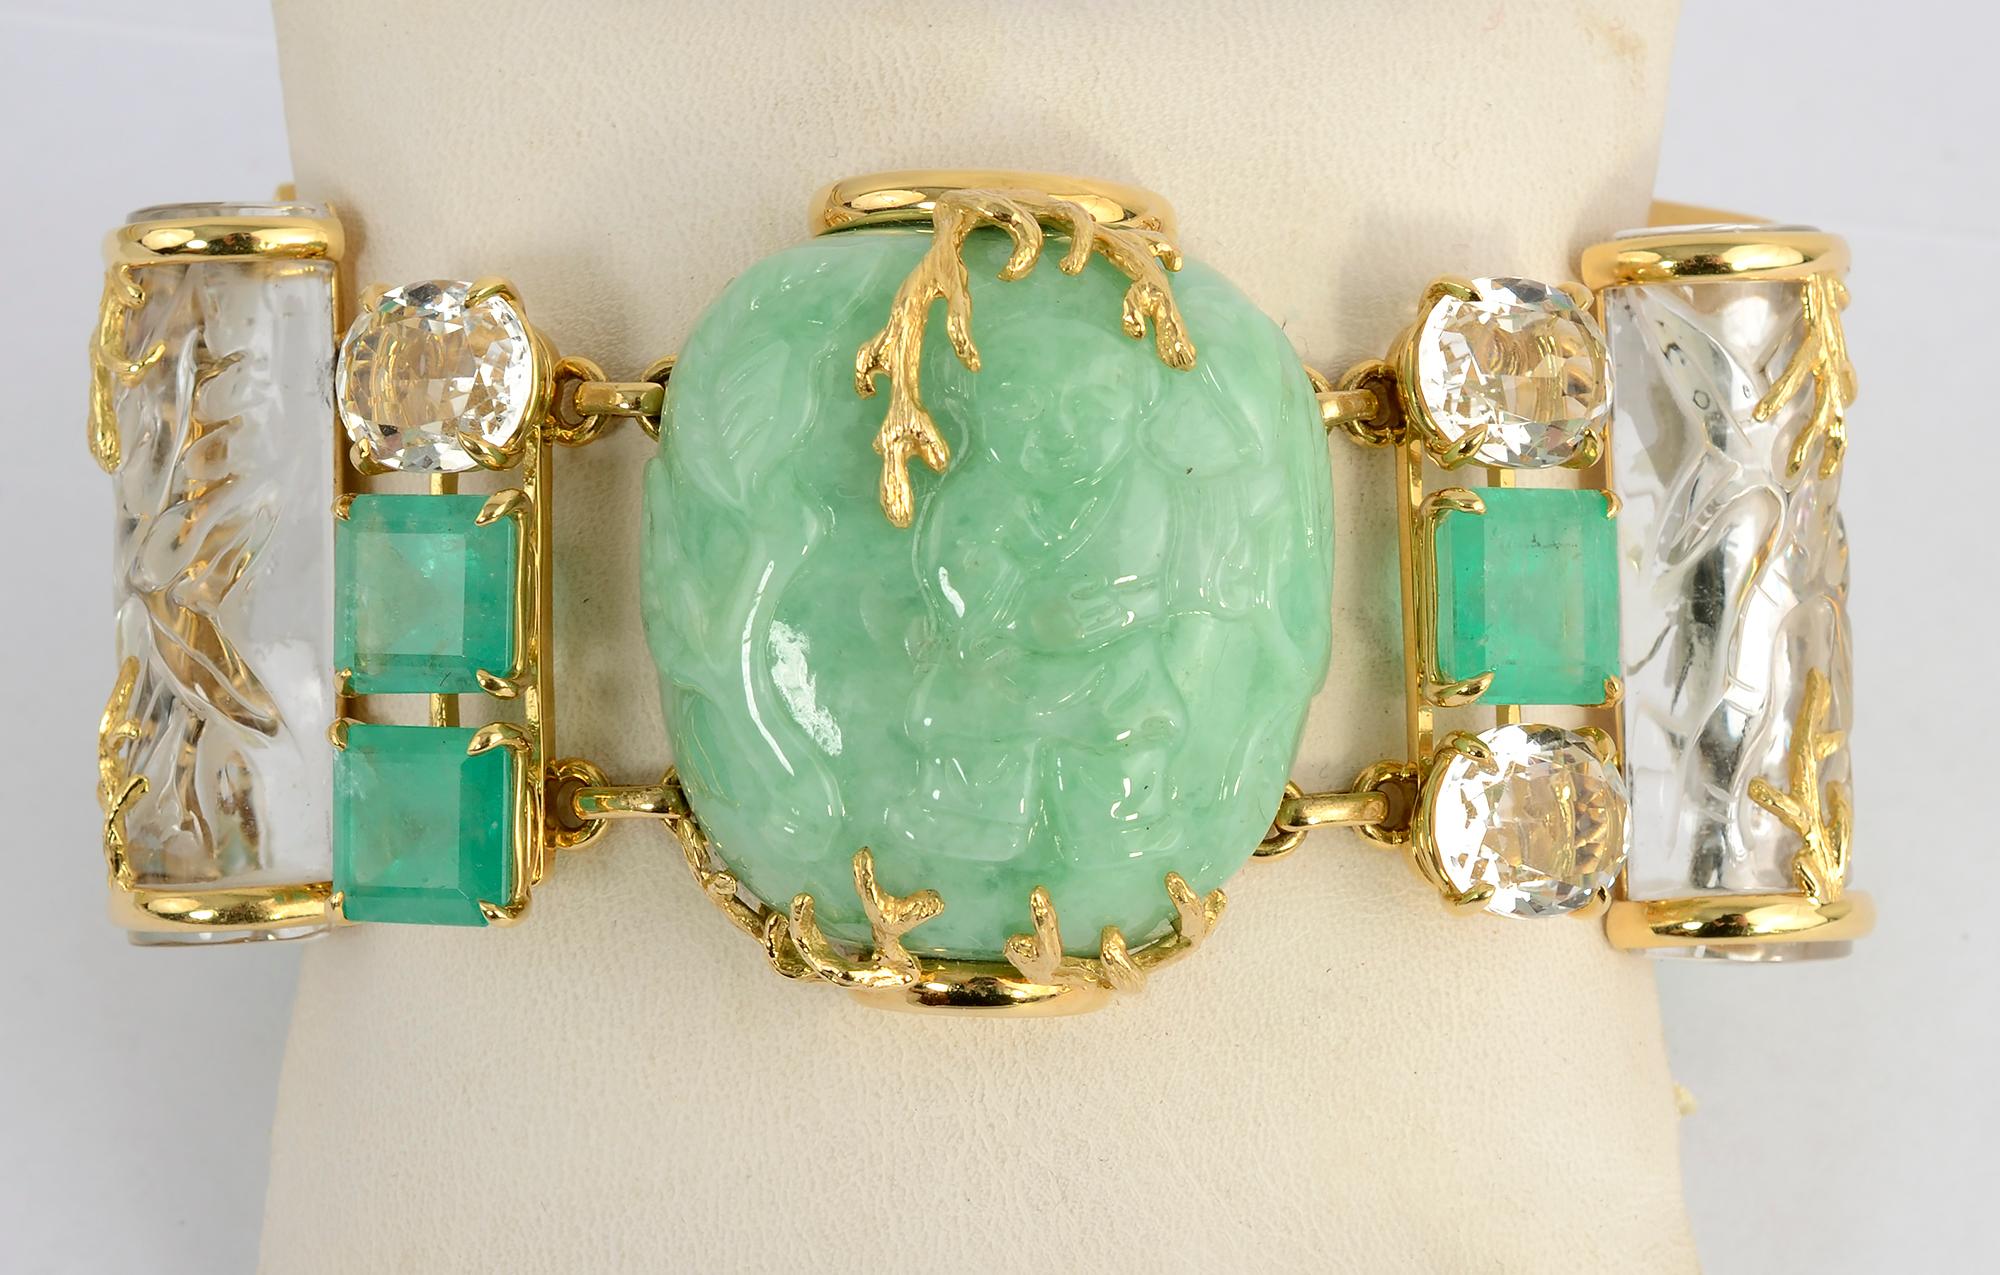 Exquisite and unusual bracelet by Seaman Schepps consisting of three carved jadeite jade snuff bottles that alternate with carved rock crystal bamboo columns. They are accented by gold branch design overlays. Between the snuff bottles and rock